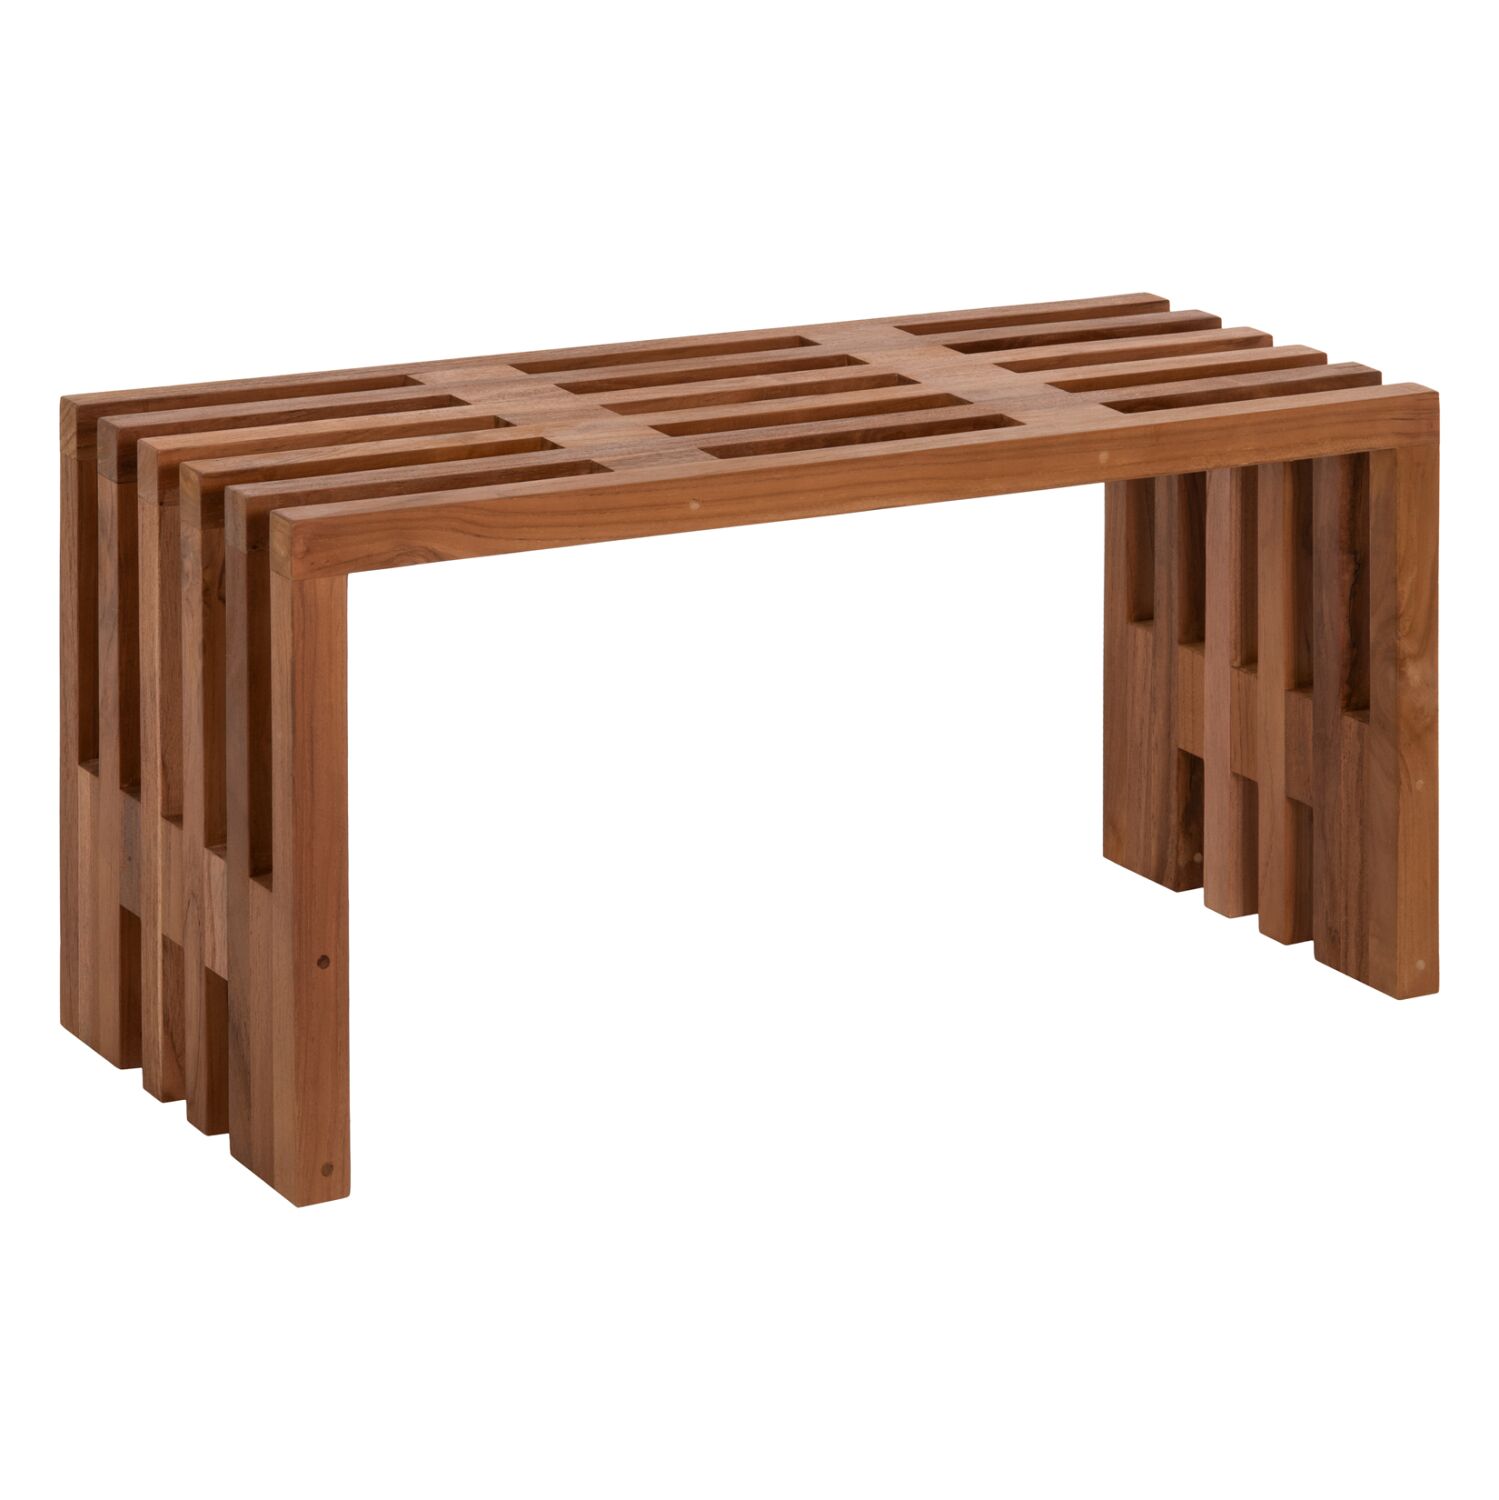 BENCH MULTI-ROLE NYA HM9547 TEAK WOOD IN NATURAL COLOR 90x30x45Hcm.